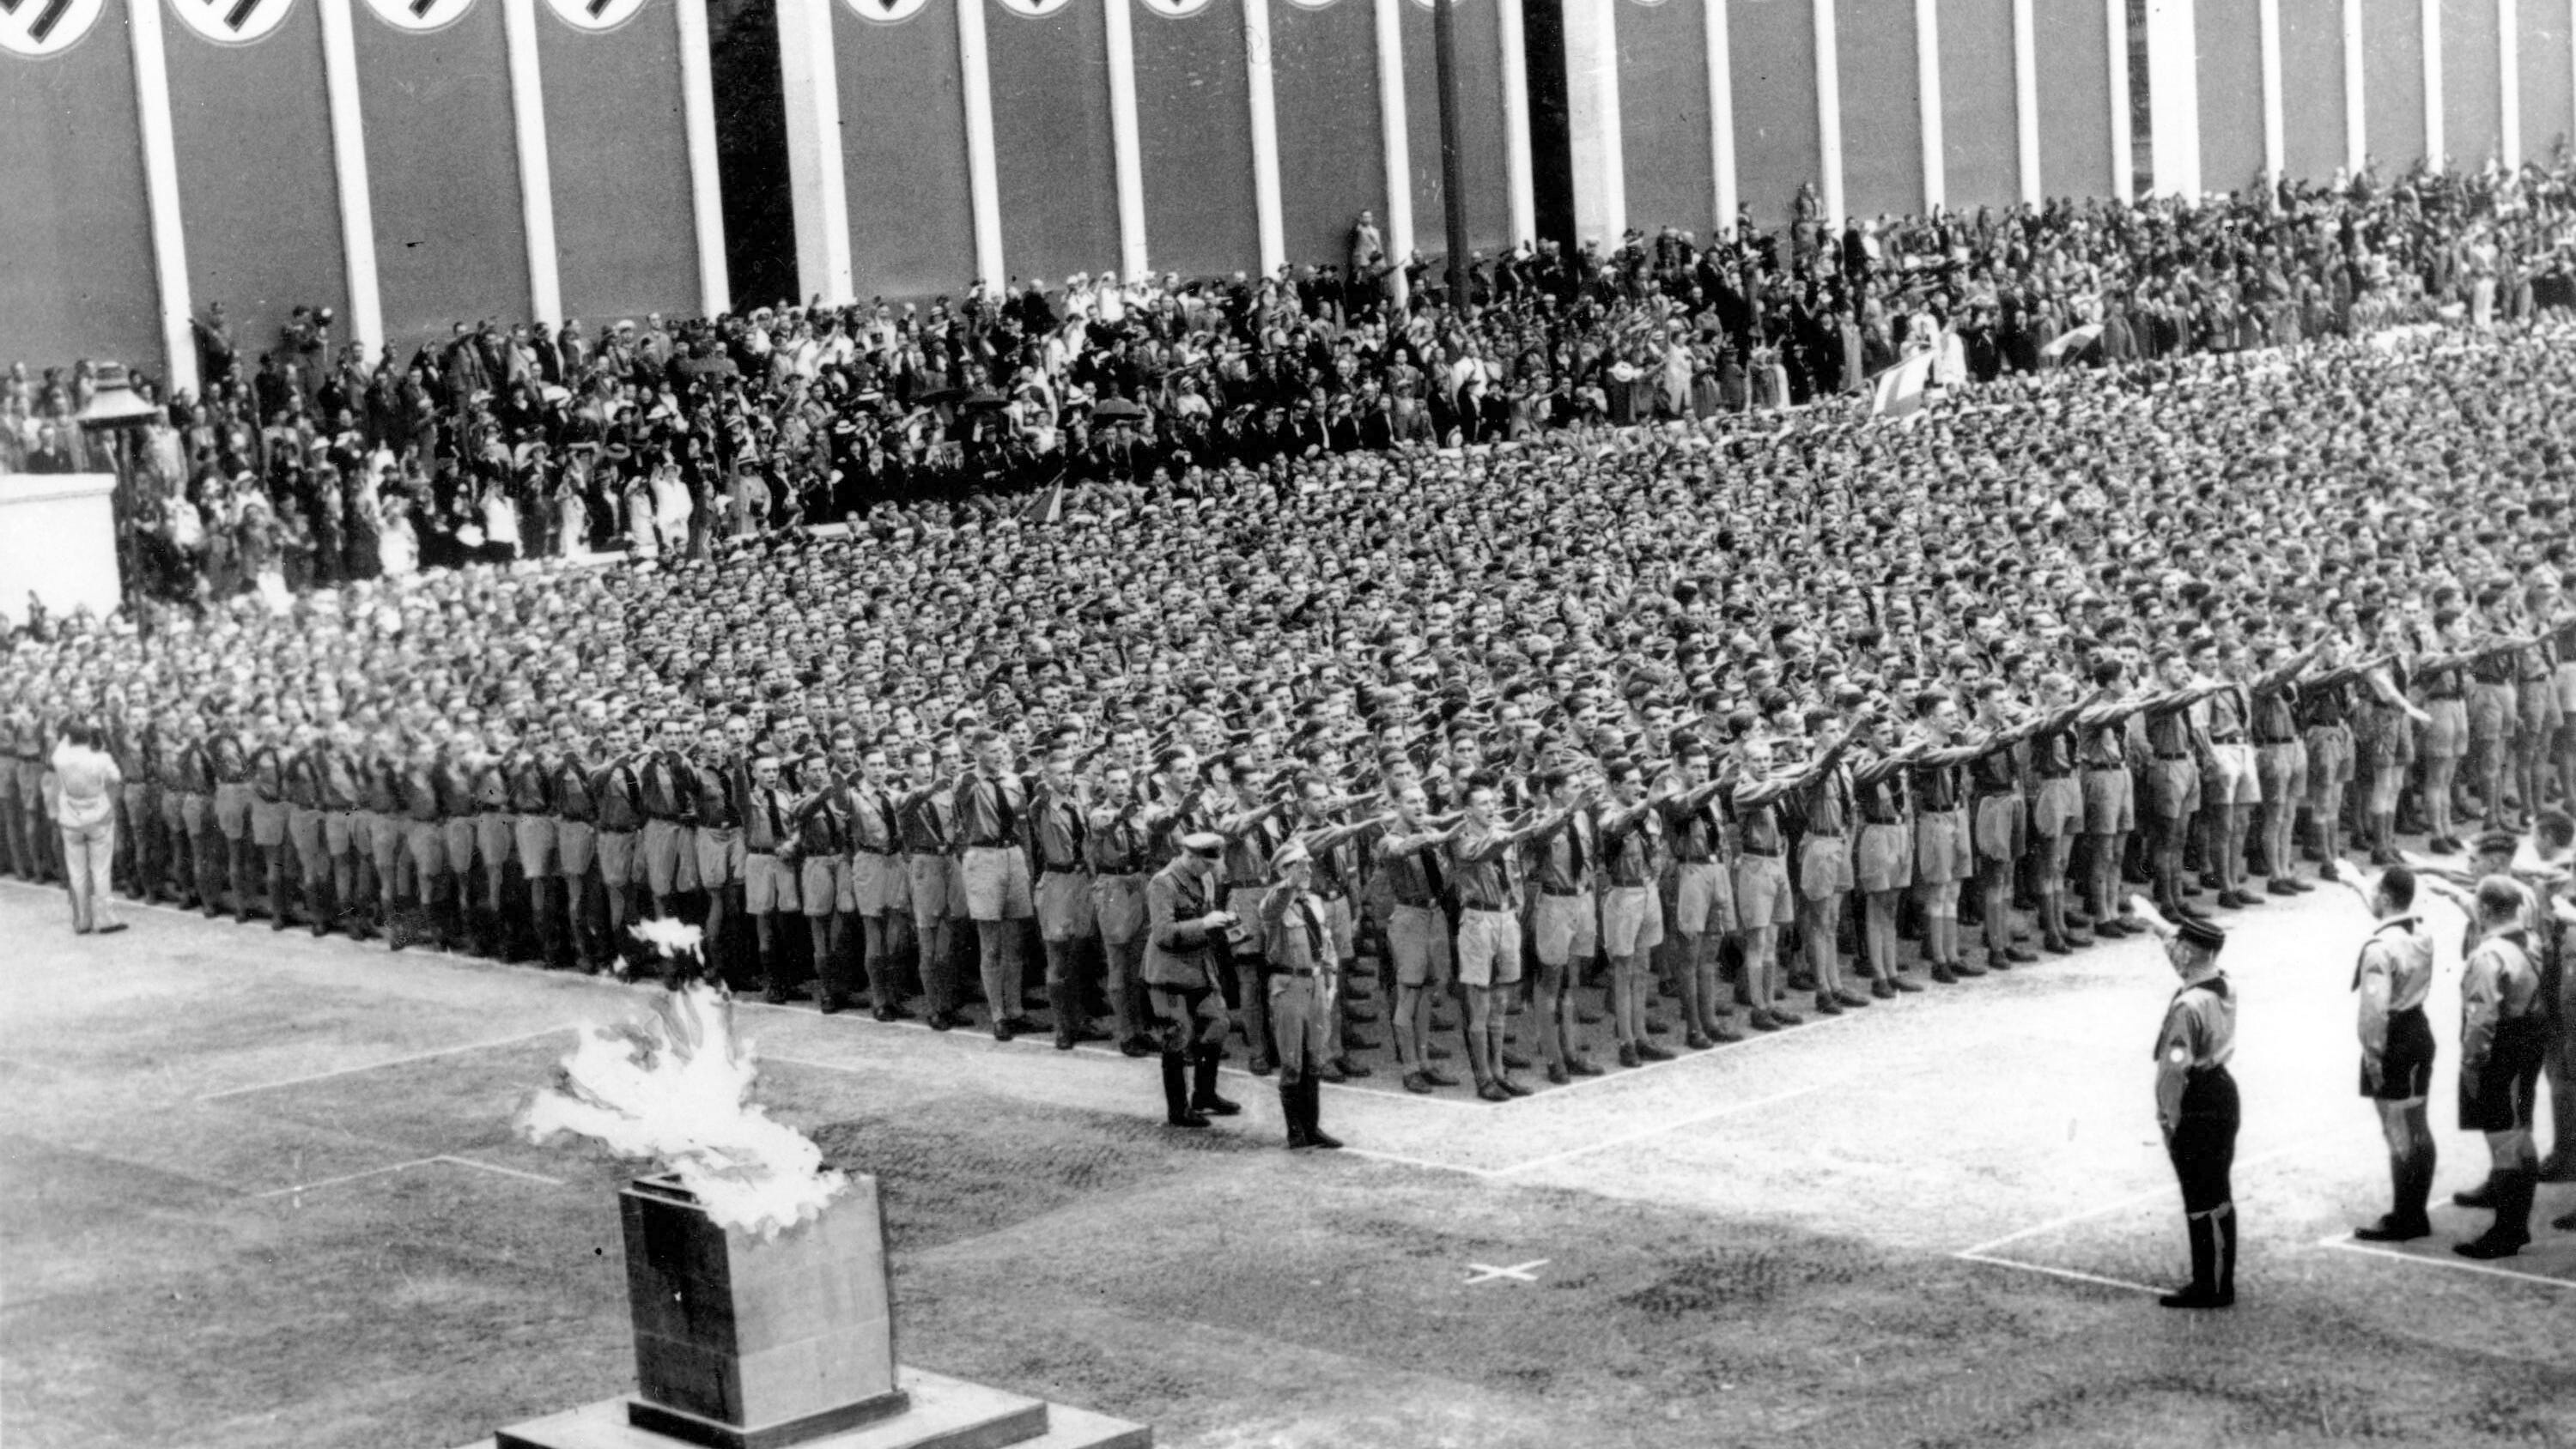 Olympic torch relay began in 1936 at Hitler's Berlin Games